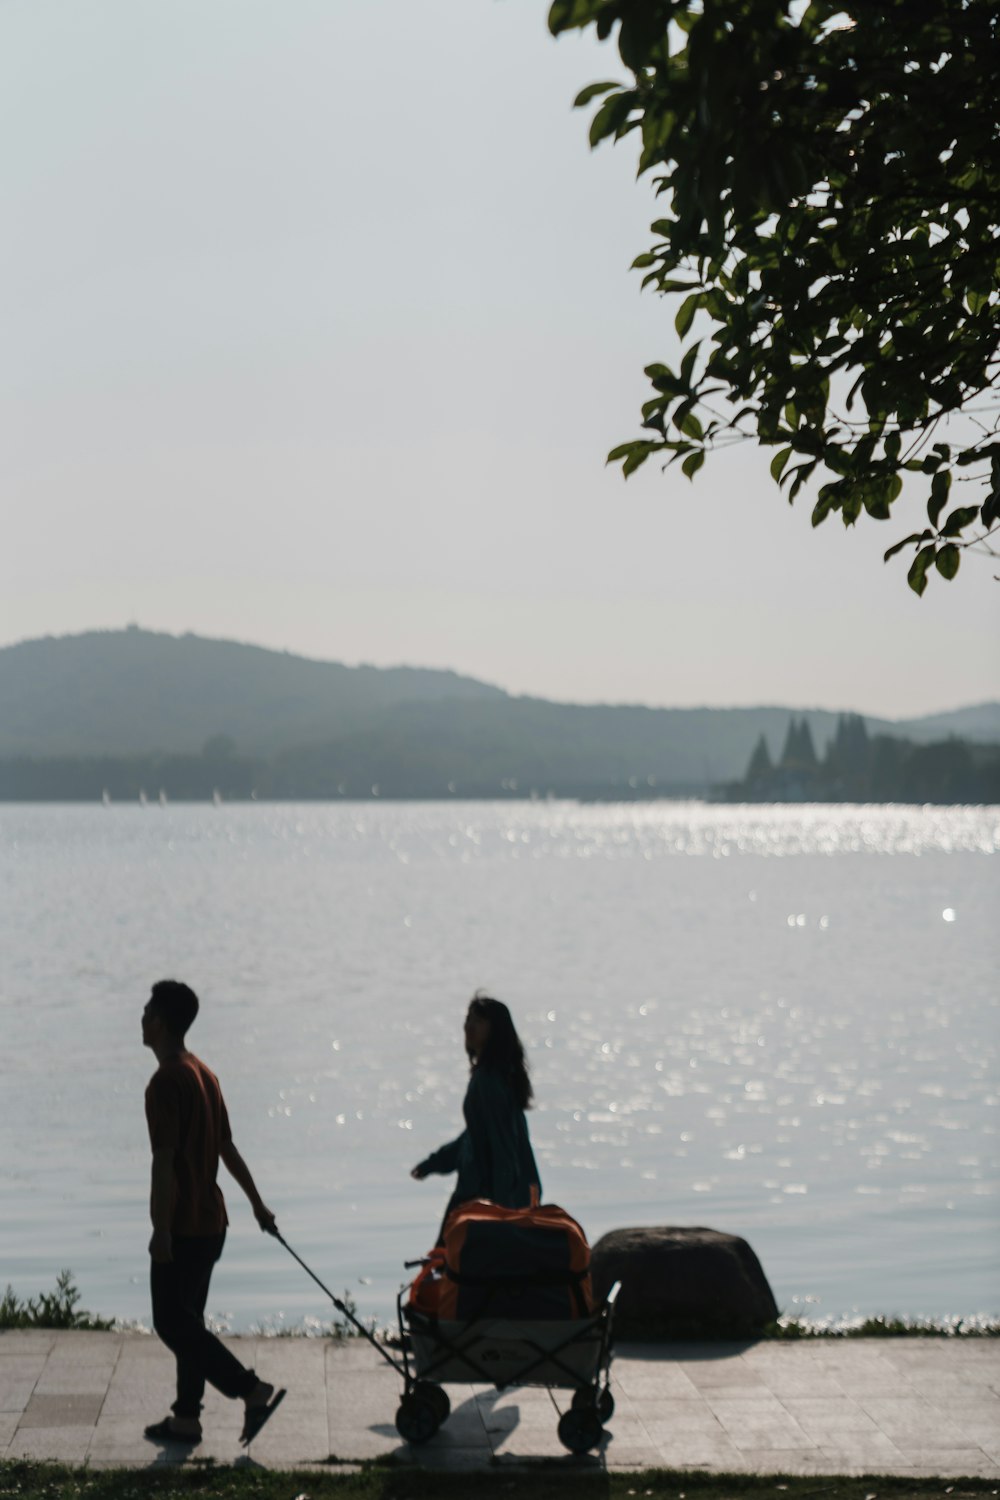 a man and woman walking by a body of water